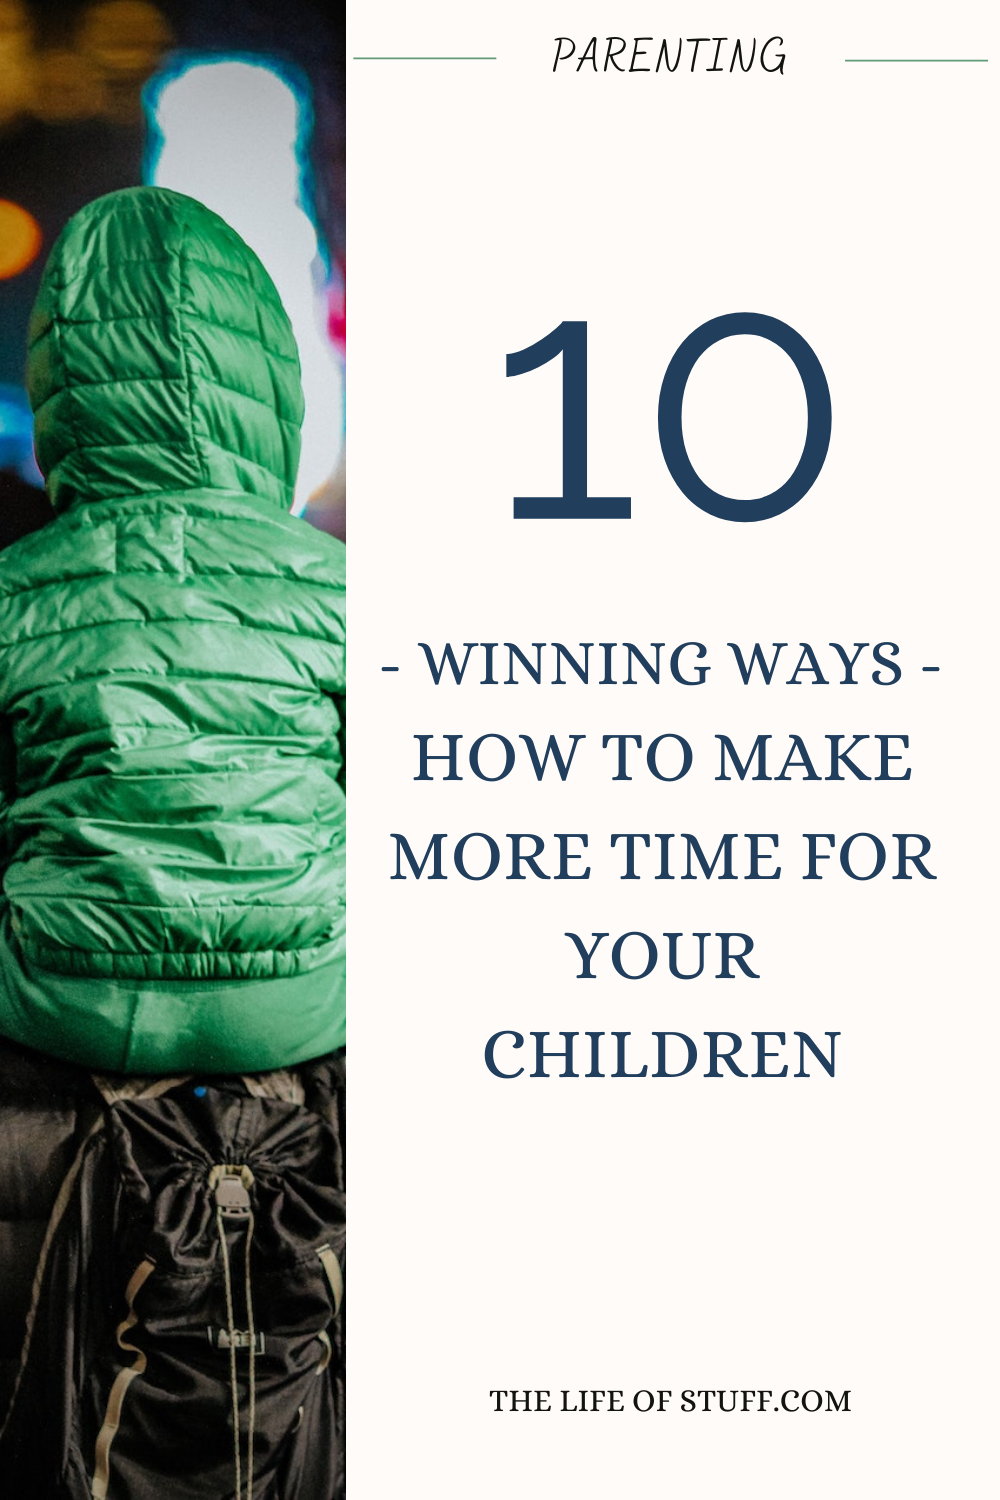 Parenting - How to Make More Time for Your Children - The Life of Stuff